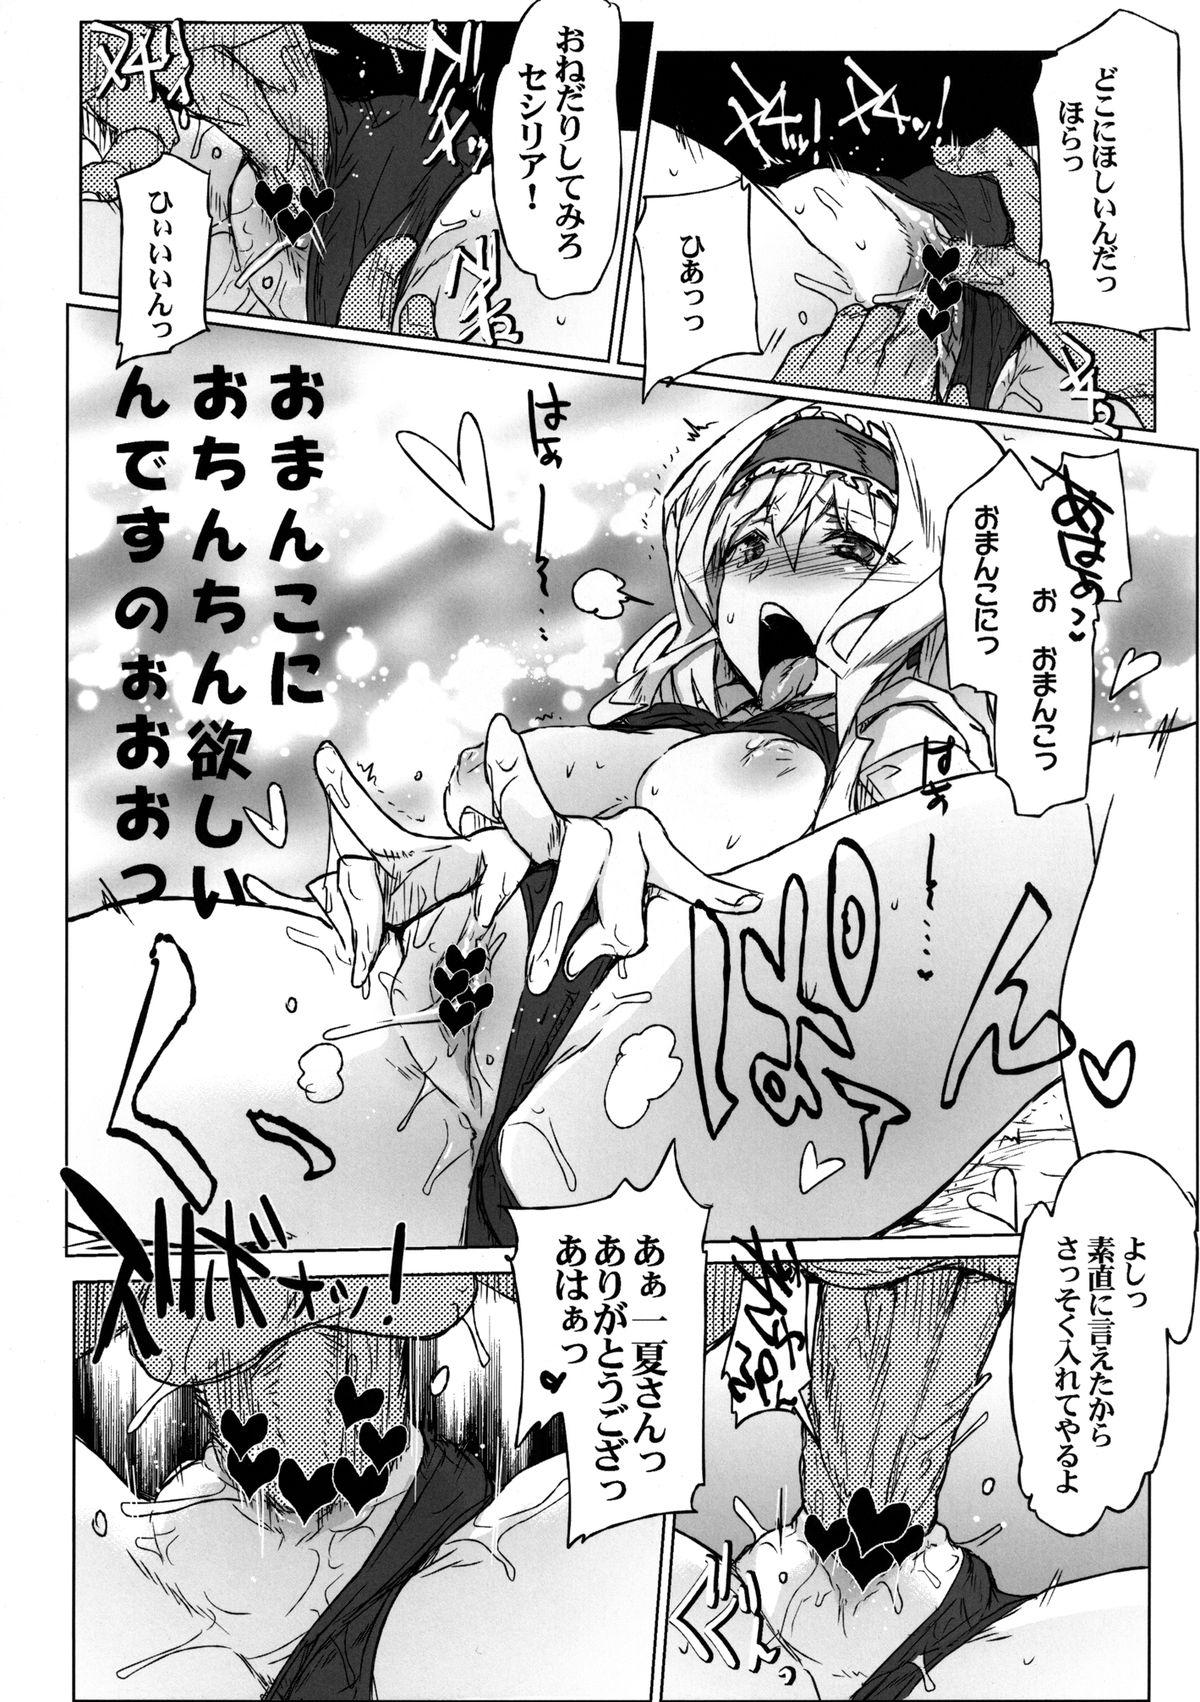 Game IS Girls 2 - Infinite stratos Tight Cunt - Page 12